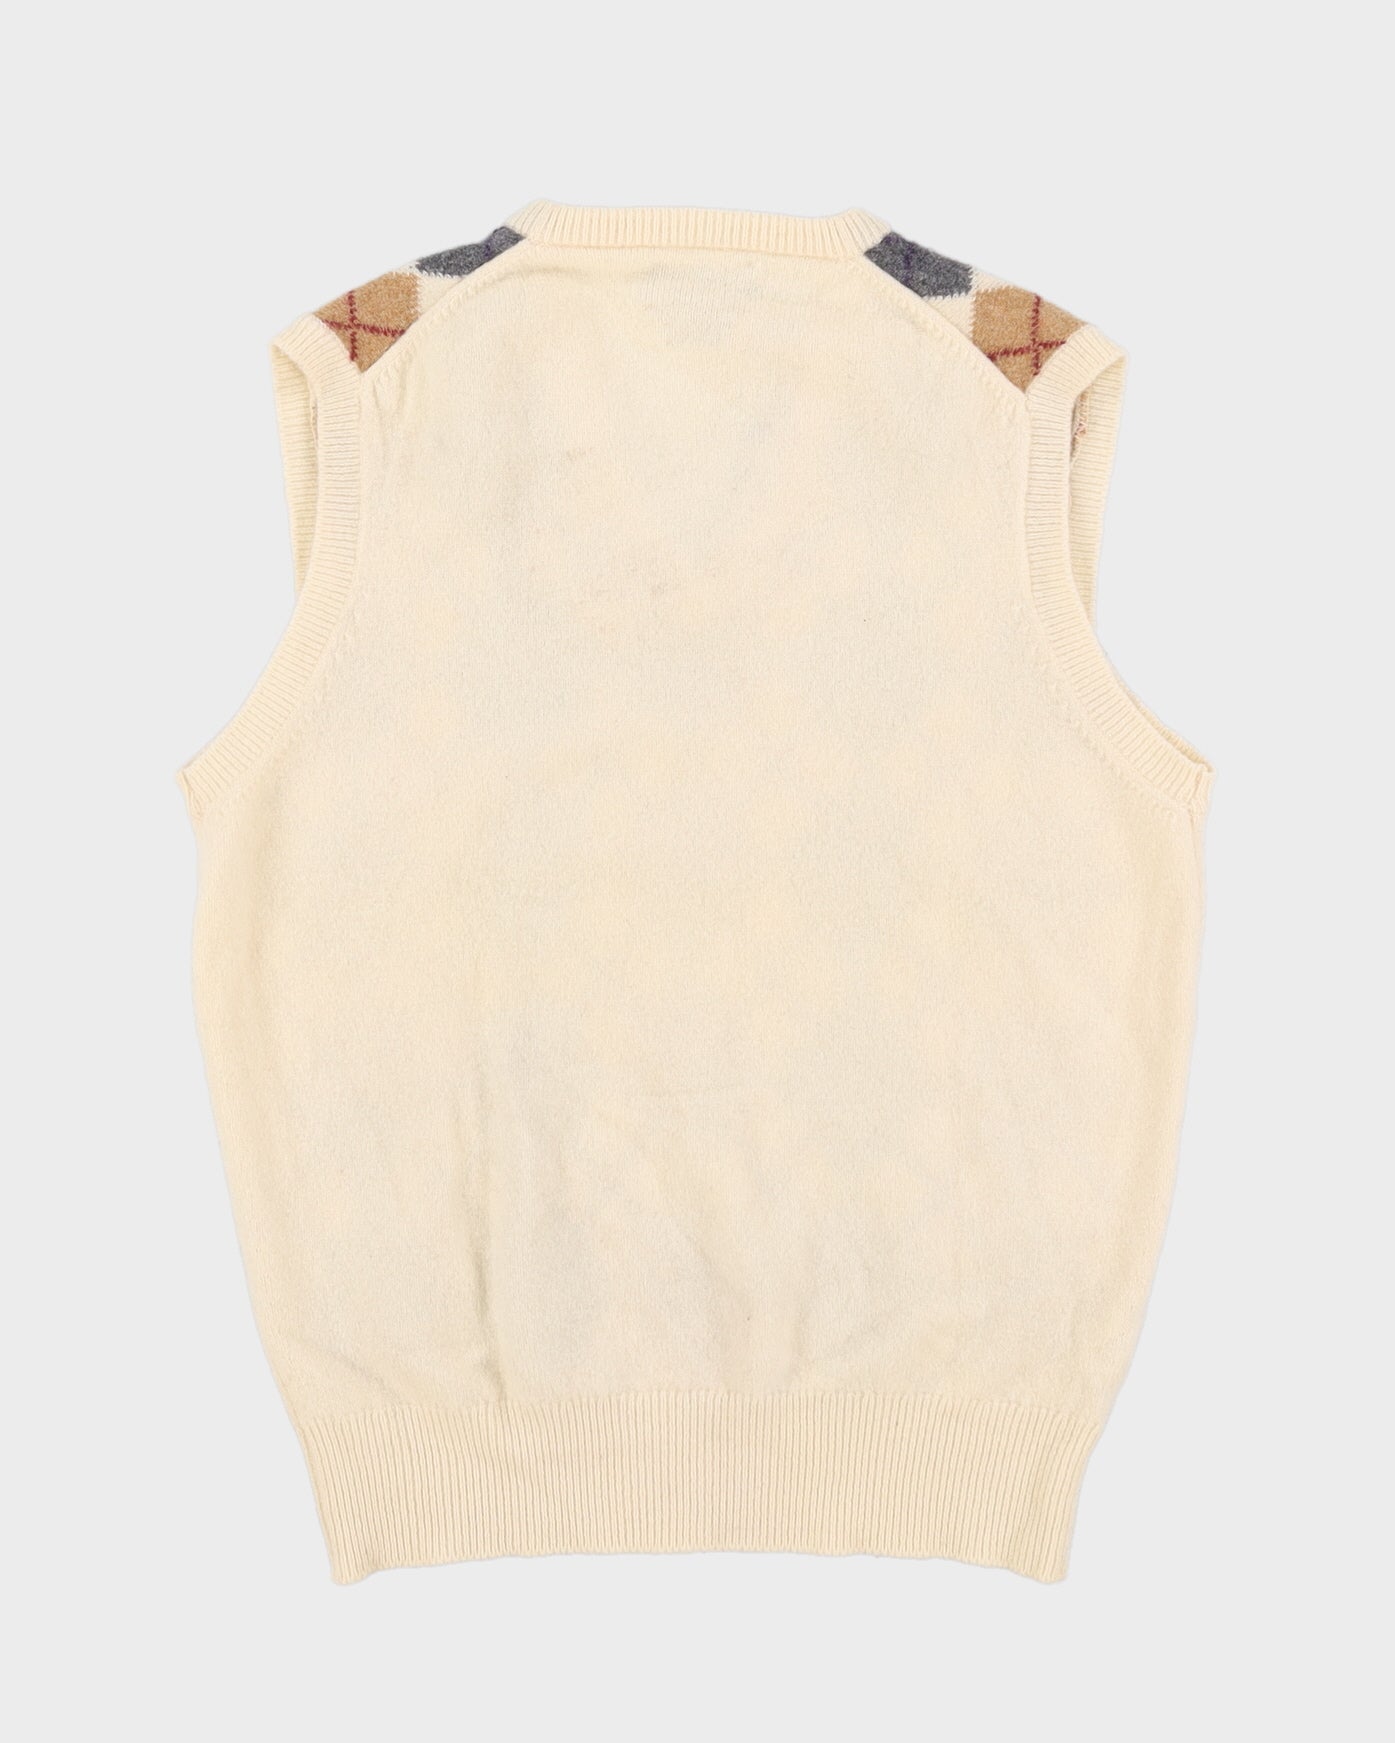 1970s Made In England Wool Tank Top - S